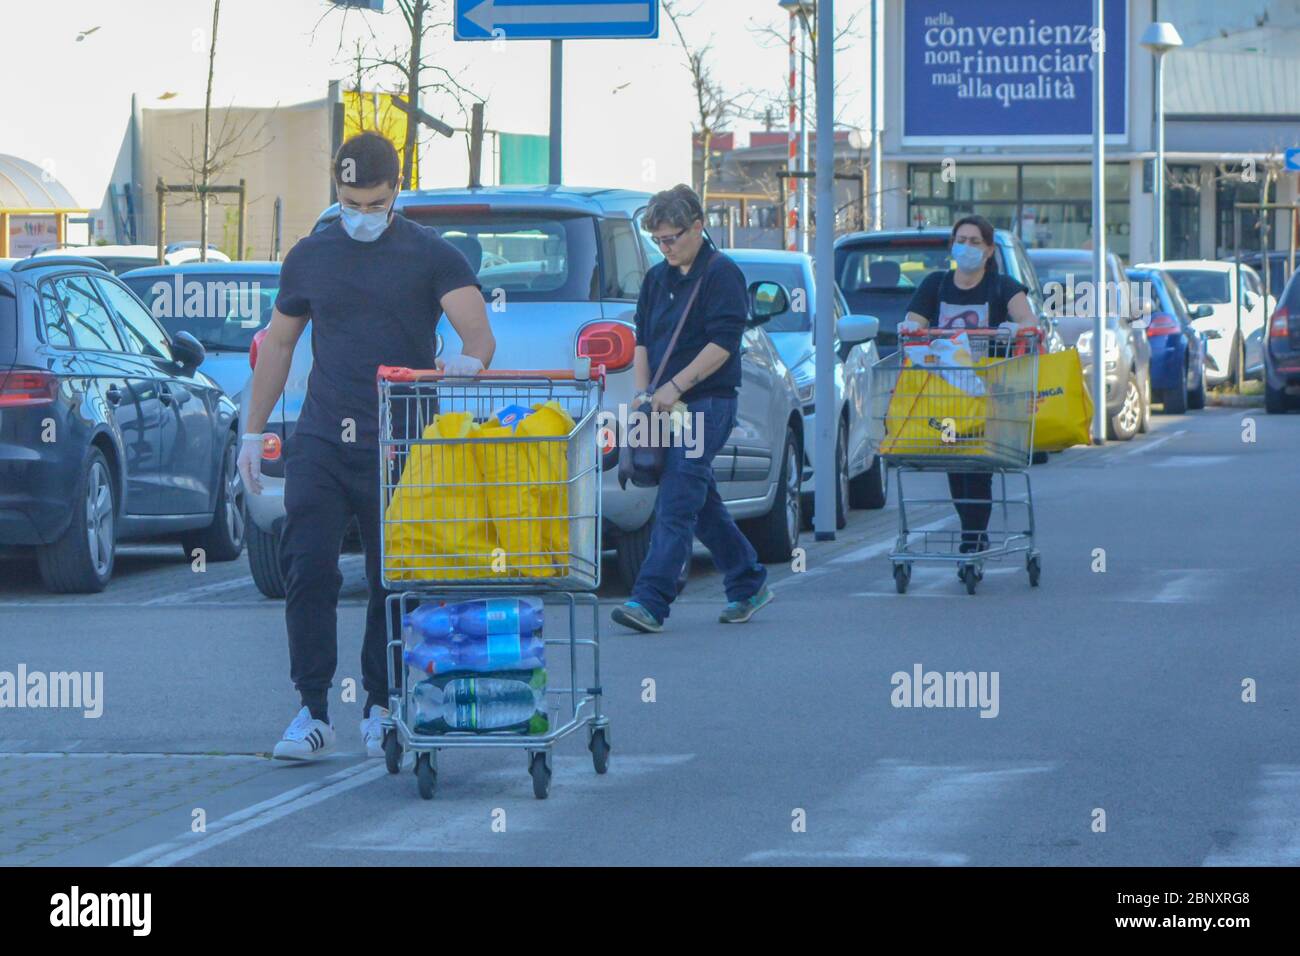 Three people walking in line, wearing coronavirus protection masks pushing shopping carts full of bags of groceries and essentials fearing second wave Stock Photo